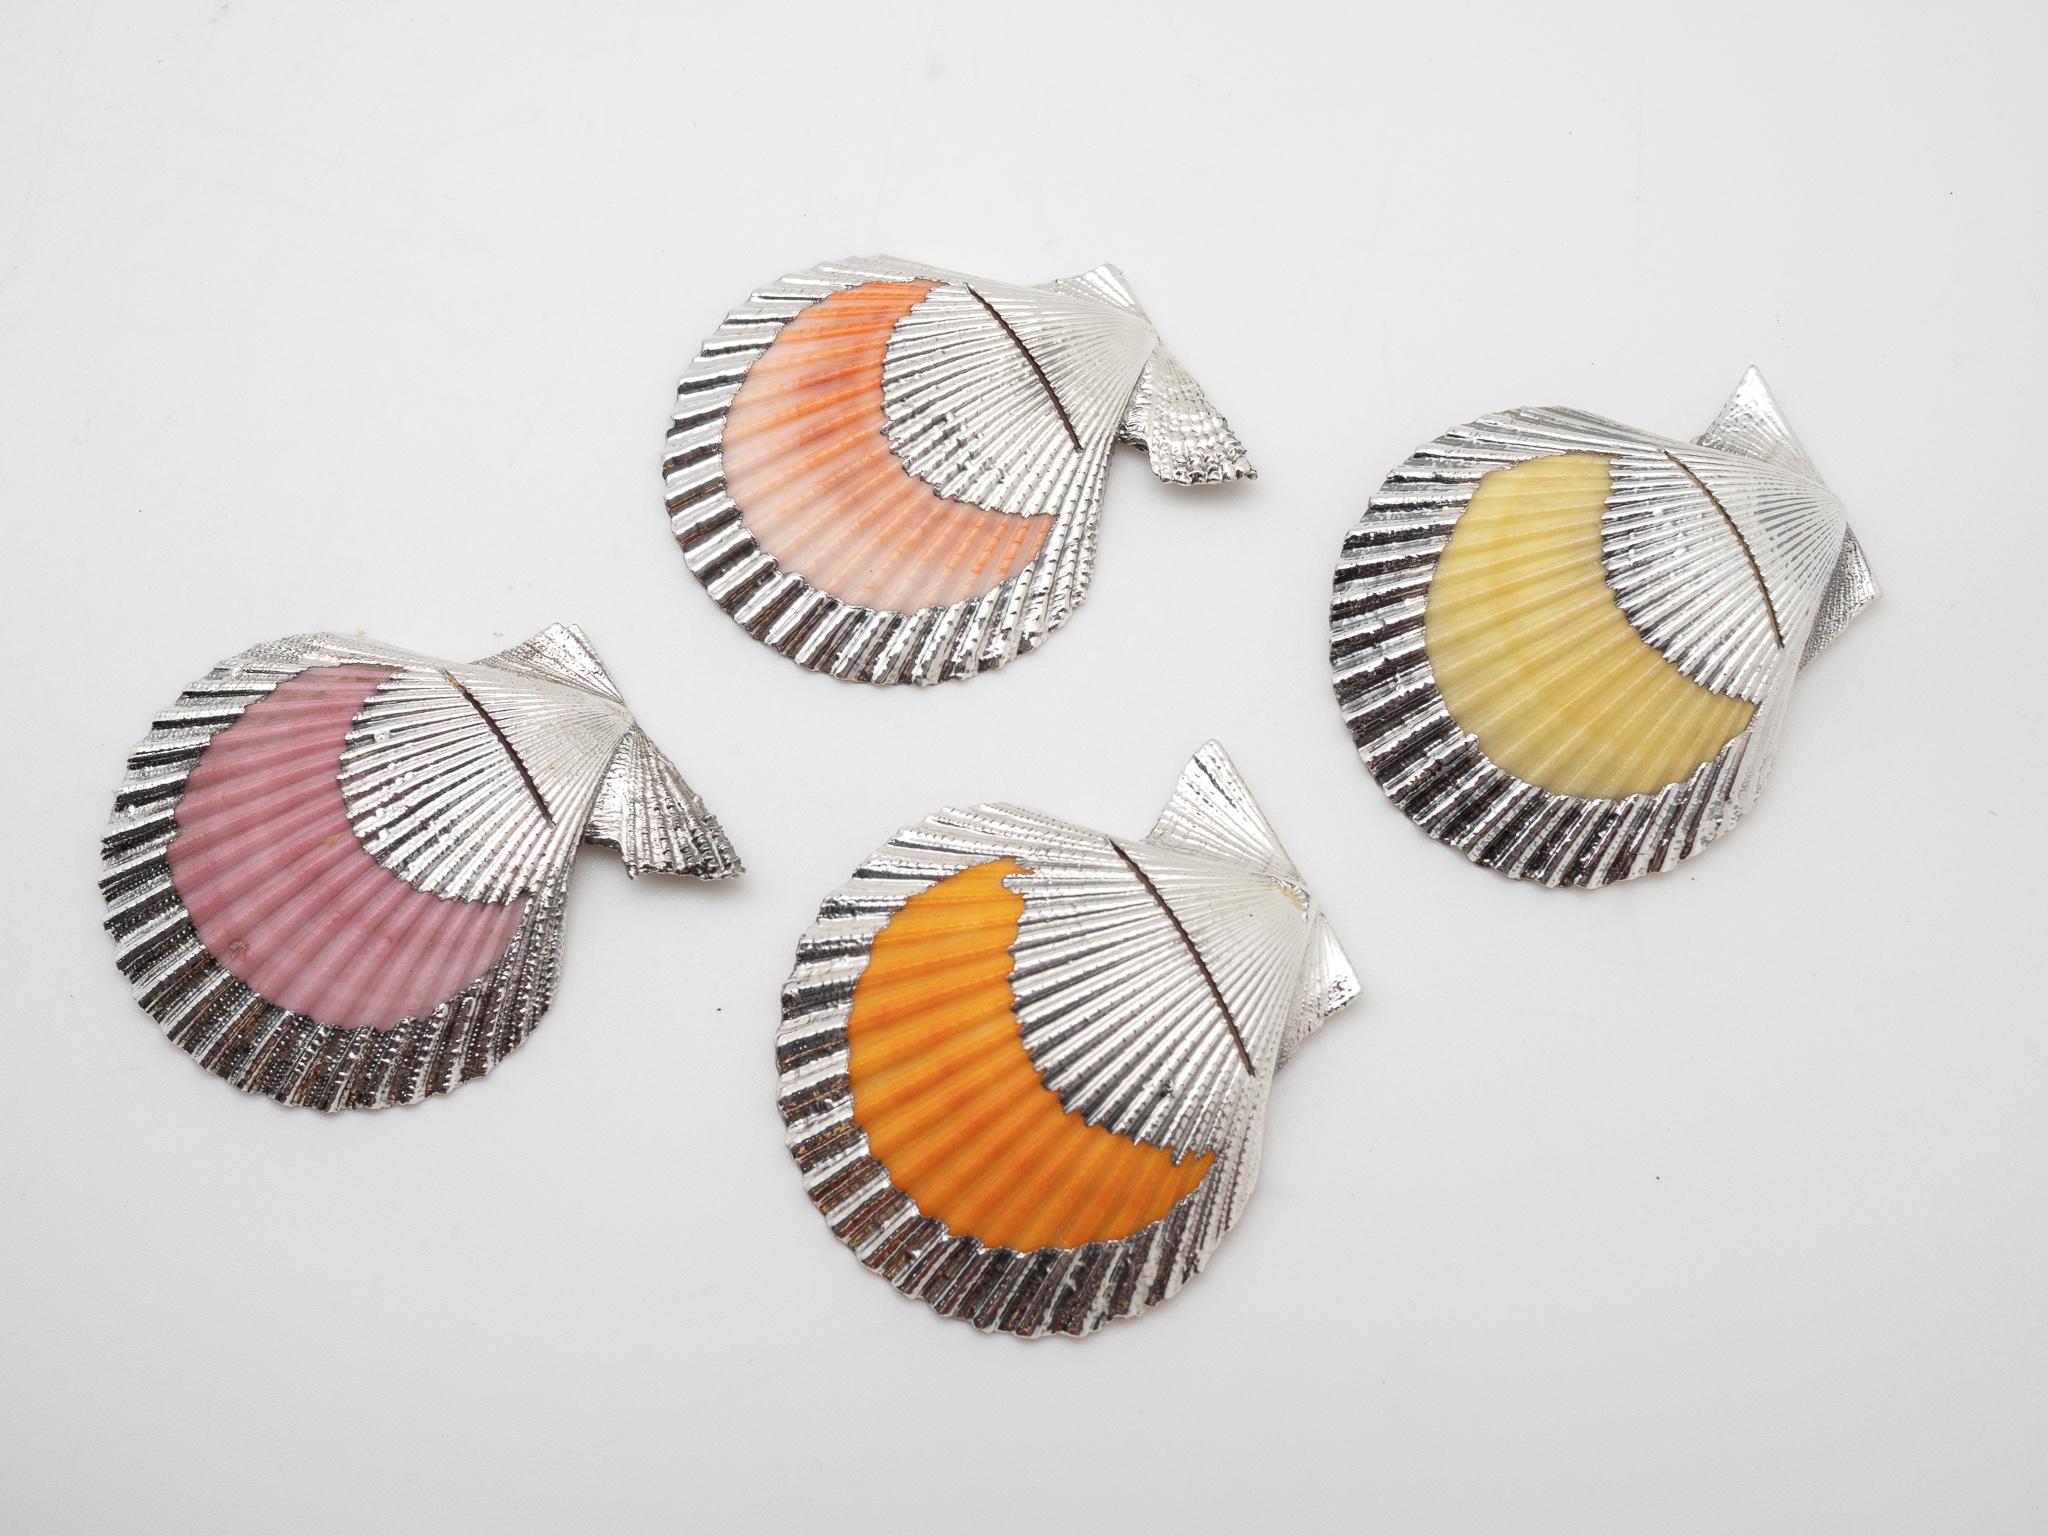 Set of 4 place card holder cockle shell partially silvered in apricot, lemon, purple, and orange colors, 2